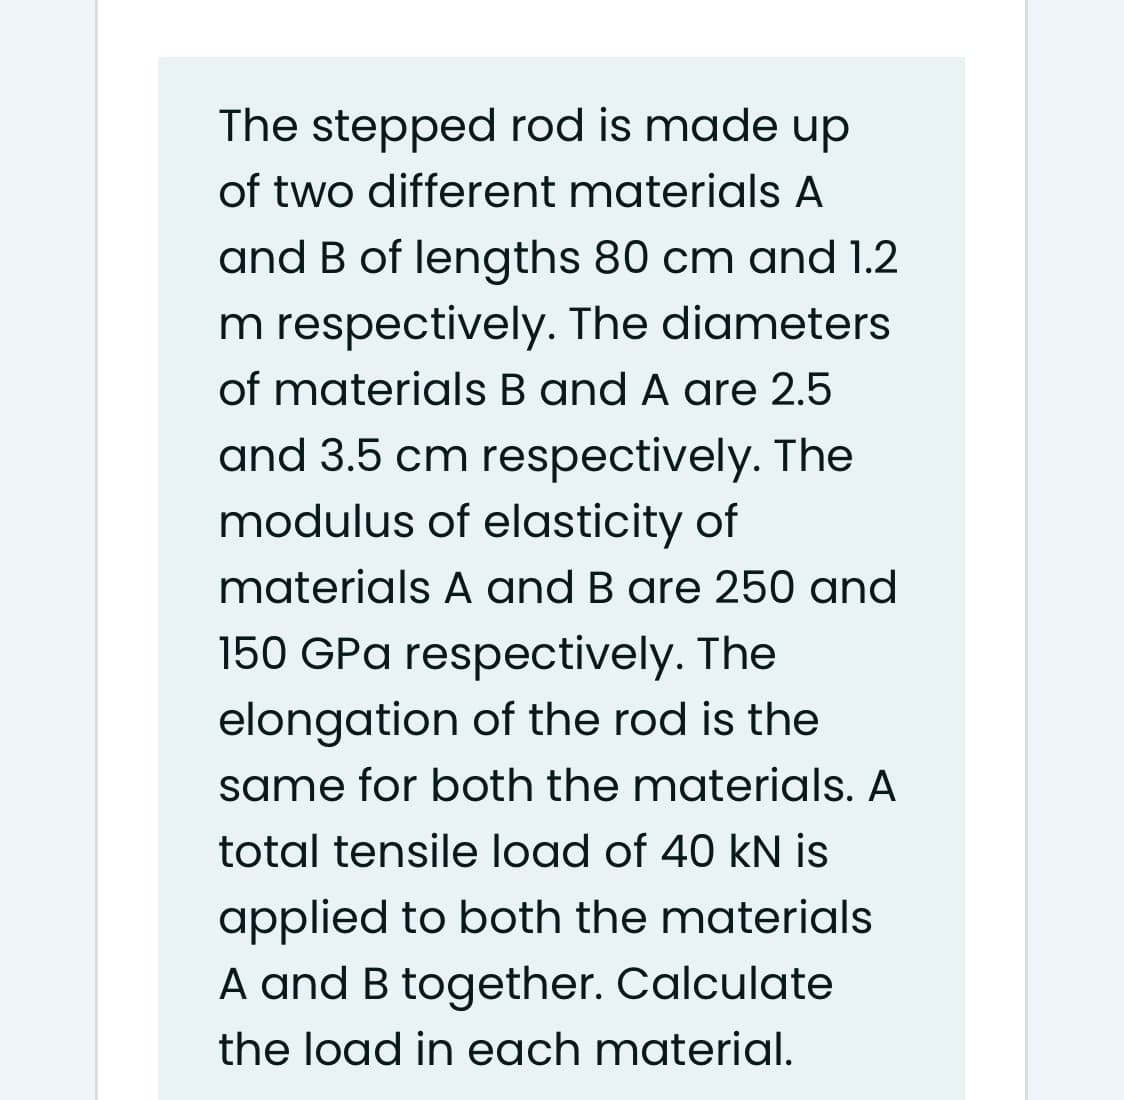 The stepped rod is made up
of two different materials A
and B of lengths 80 cm and 1.2
m respectively. The diameters
of materials B and A are 2.5
and 3.5 cm respectively. The
modulus of elasticity of
materials A and B are 250 and
150 GPa respectively. The
elongation of the rod is the
same for both the materials. A
total tensile load of 40 kN is
applied to both the materials
A and B together. Calculate
the load in each material.
